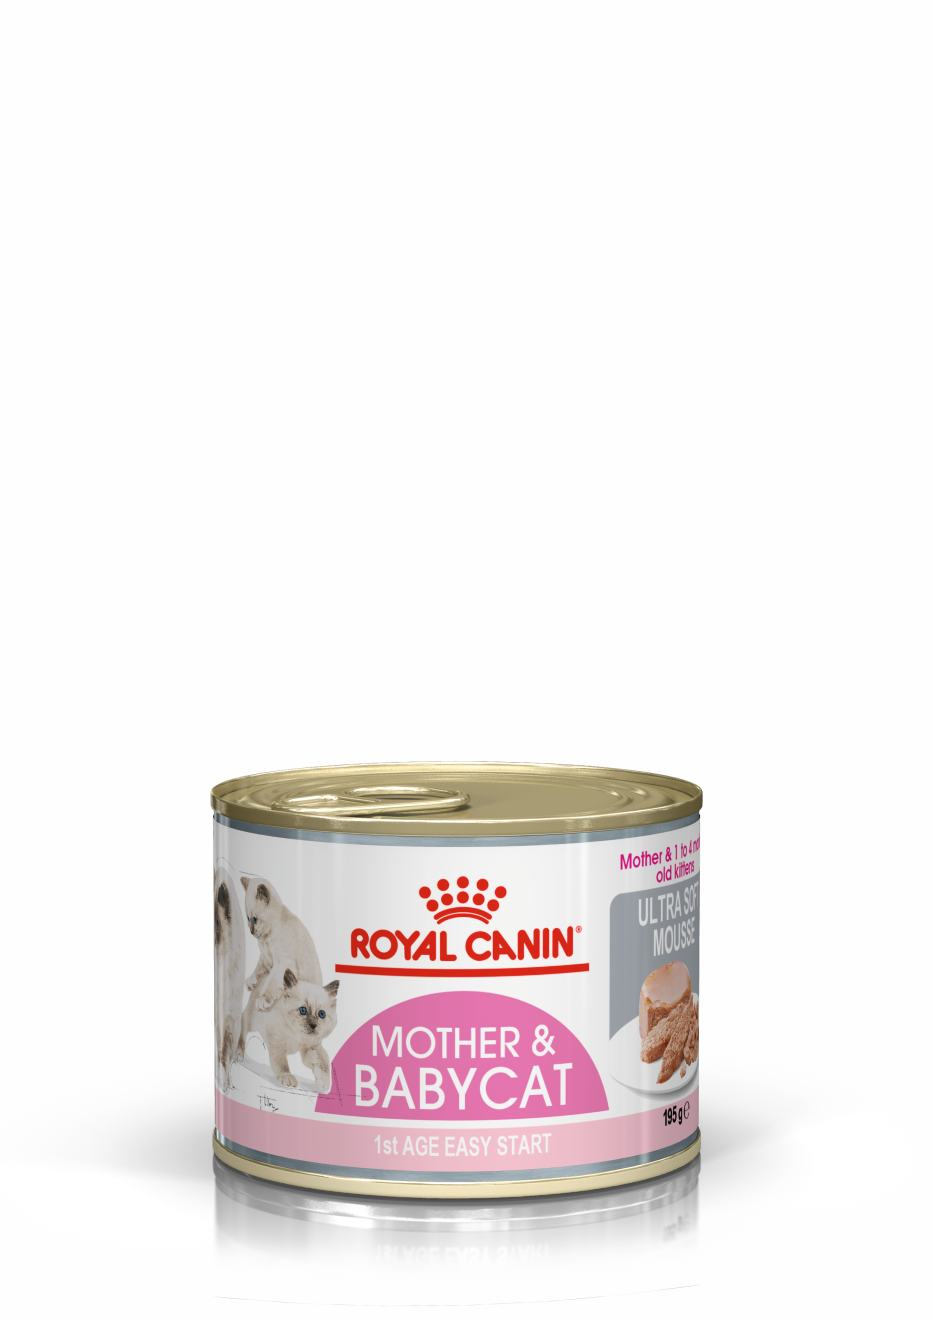 Royal Canin - Mother & Baby Cat 195g